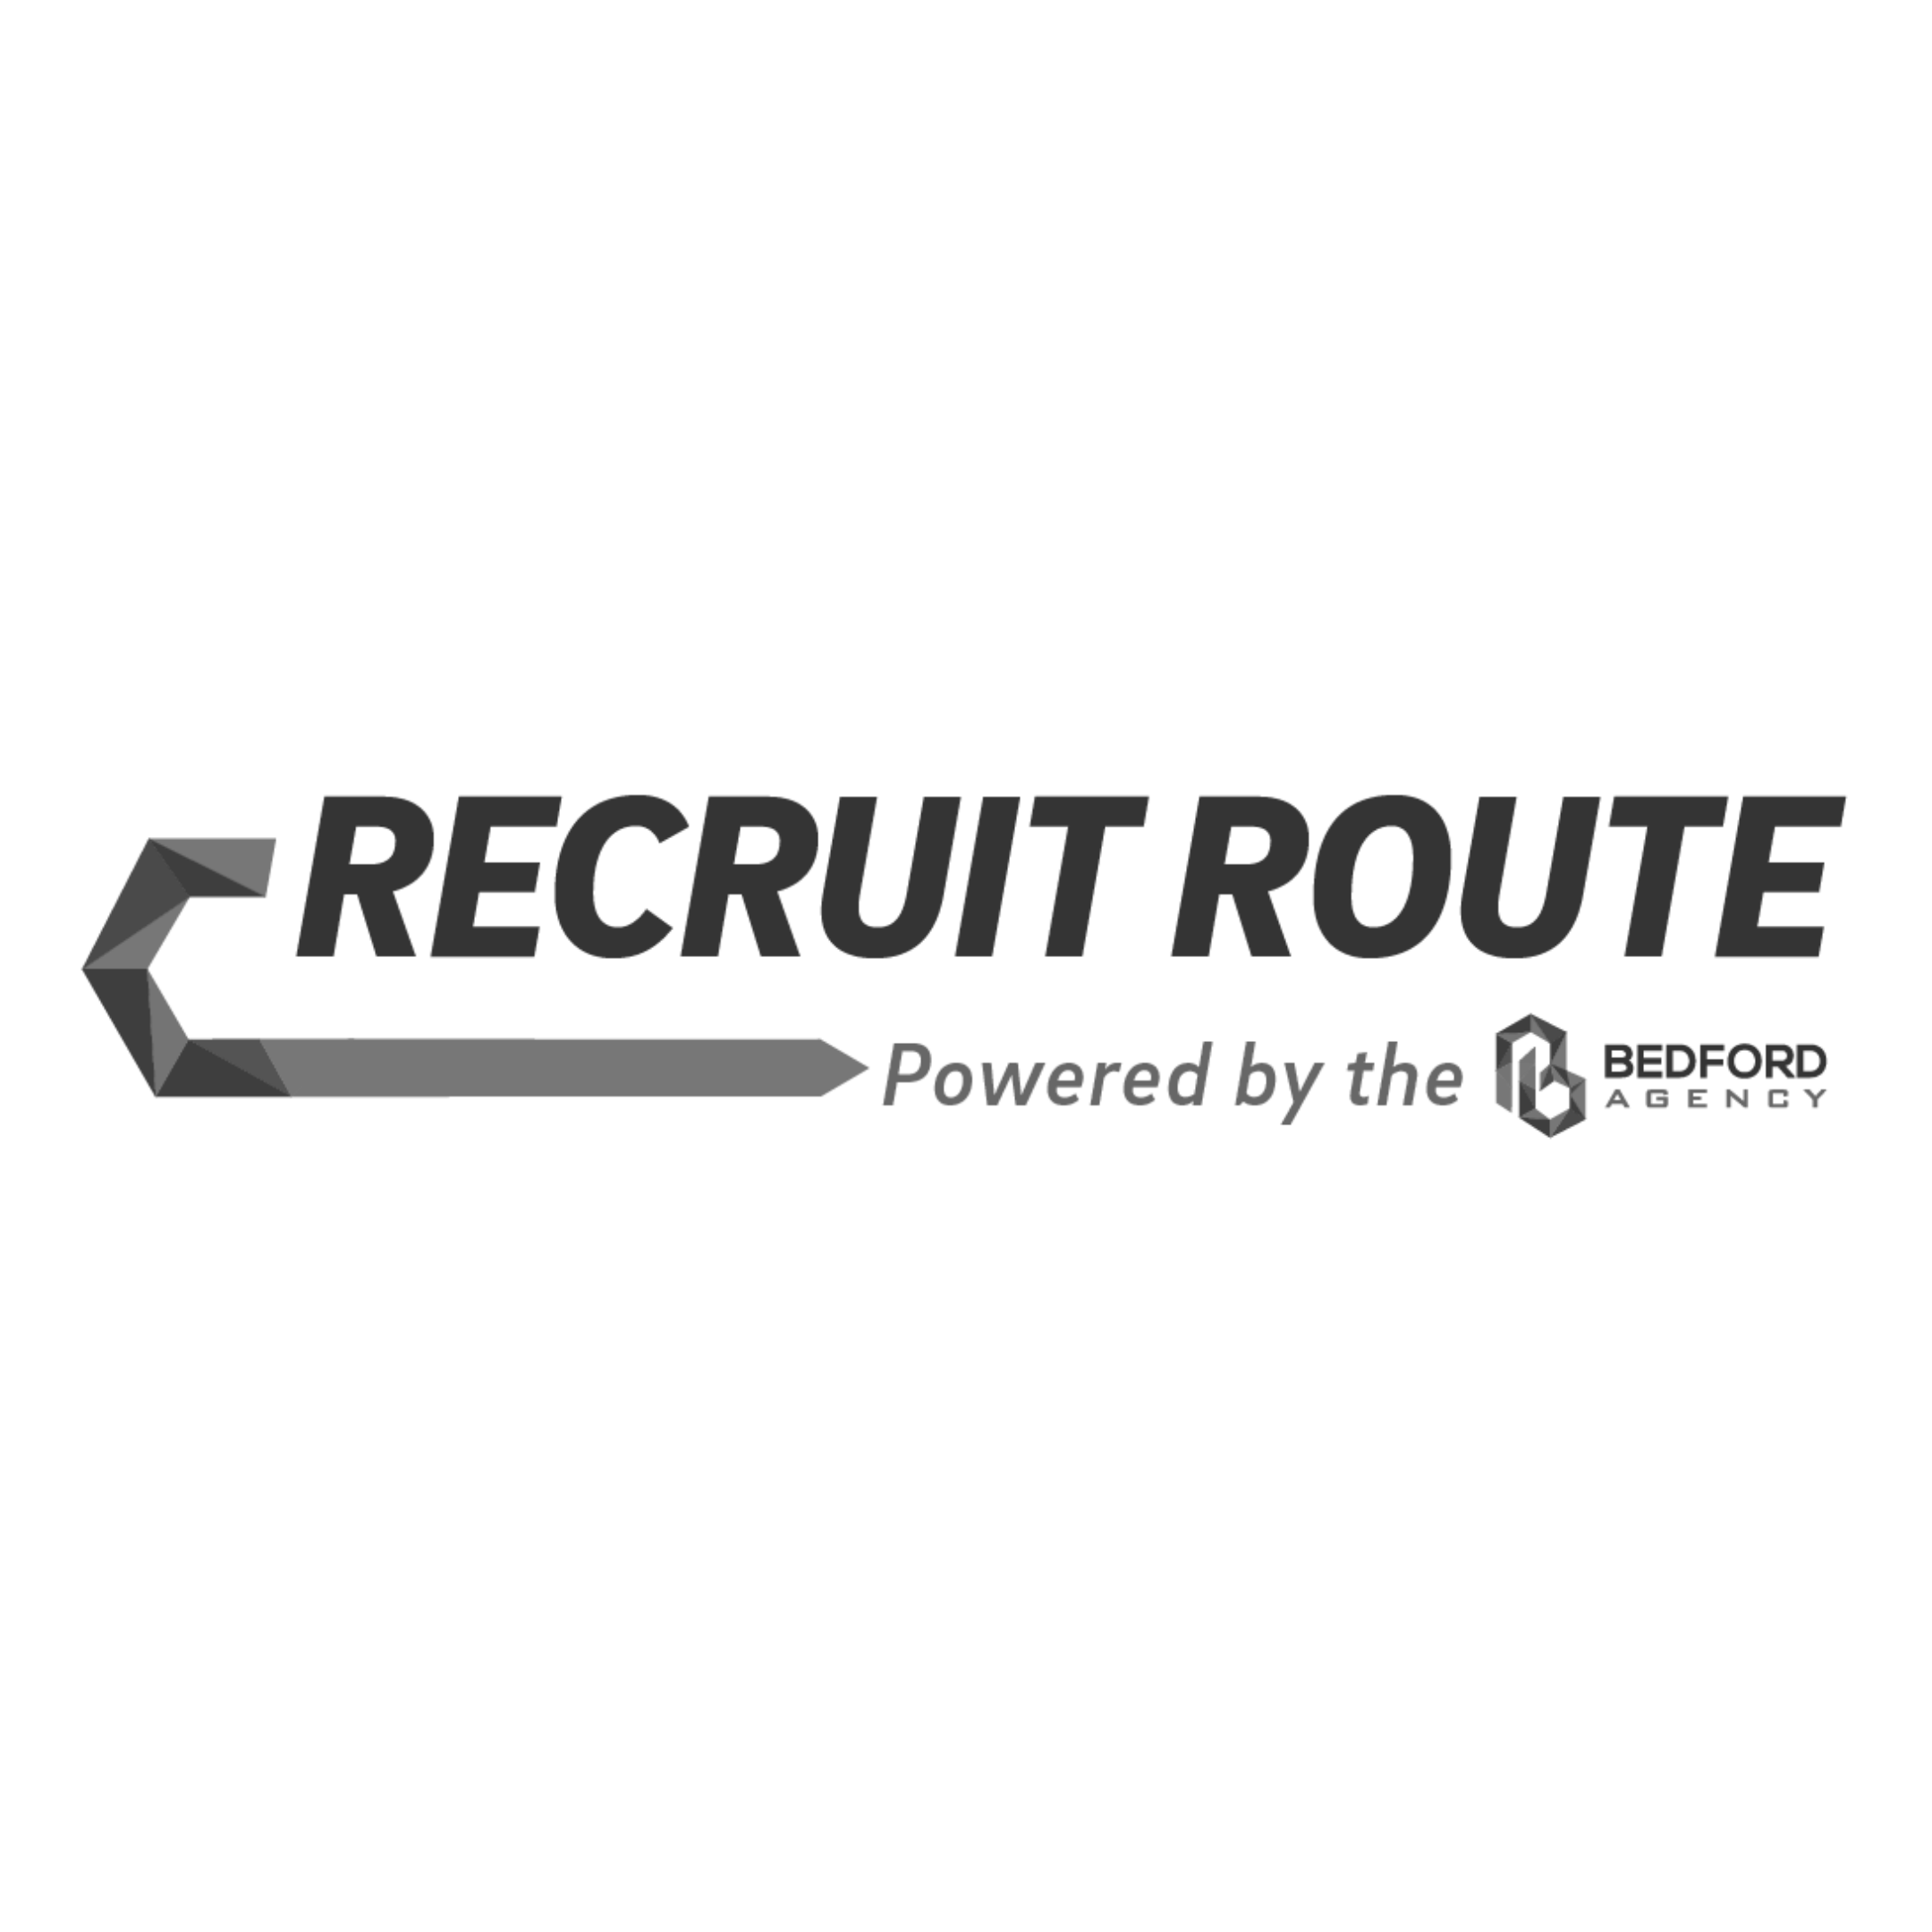 Eccker Sports Partners With Recruit Route To Provide High School Coaches And Student-Athletes With Education And Assistance In Recruitment And NIL